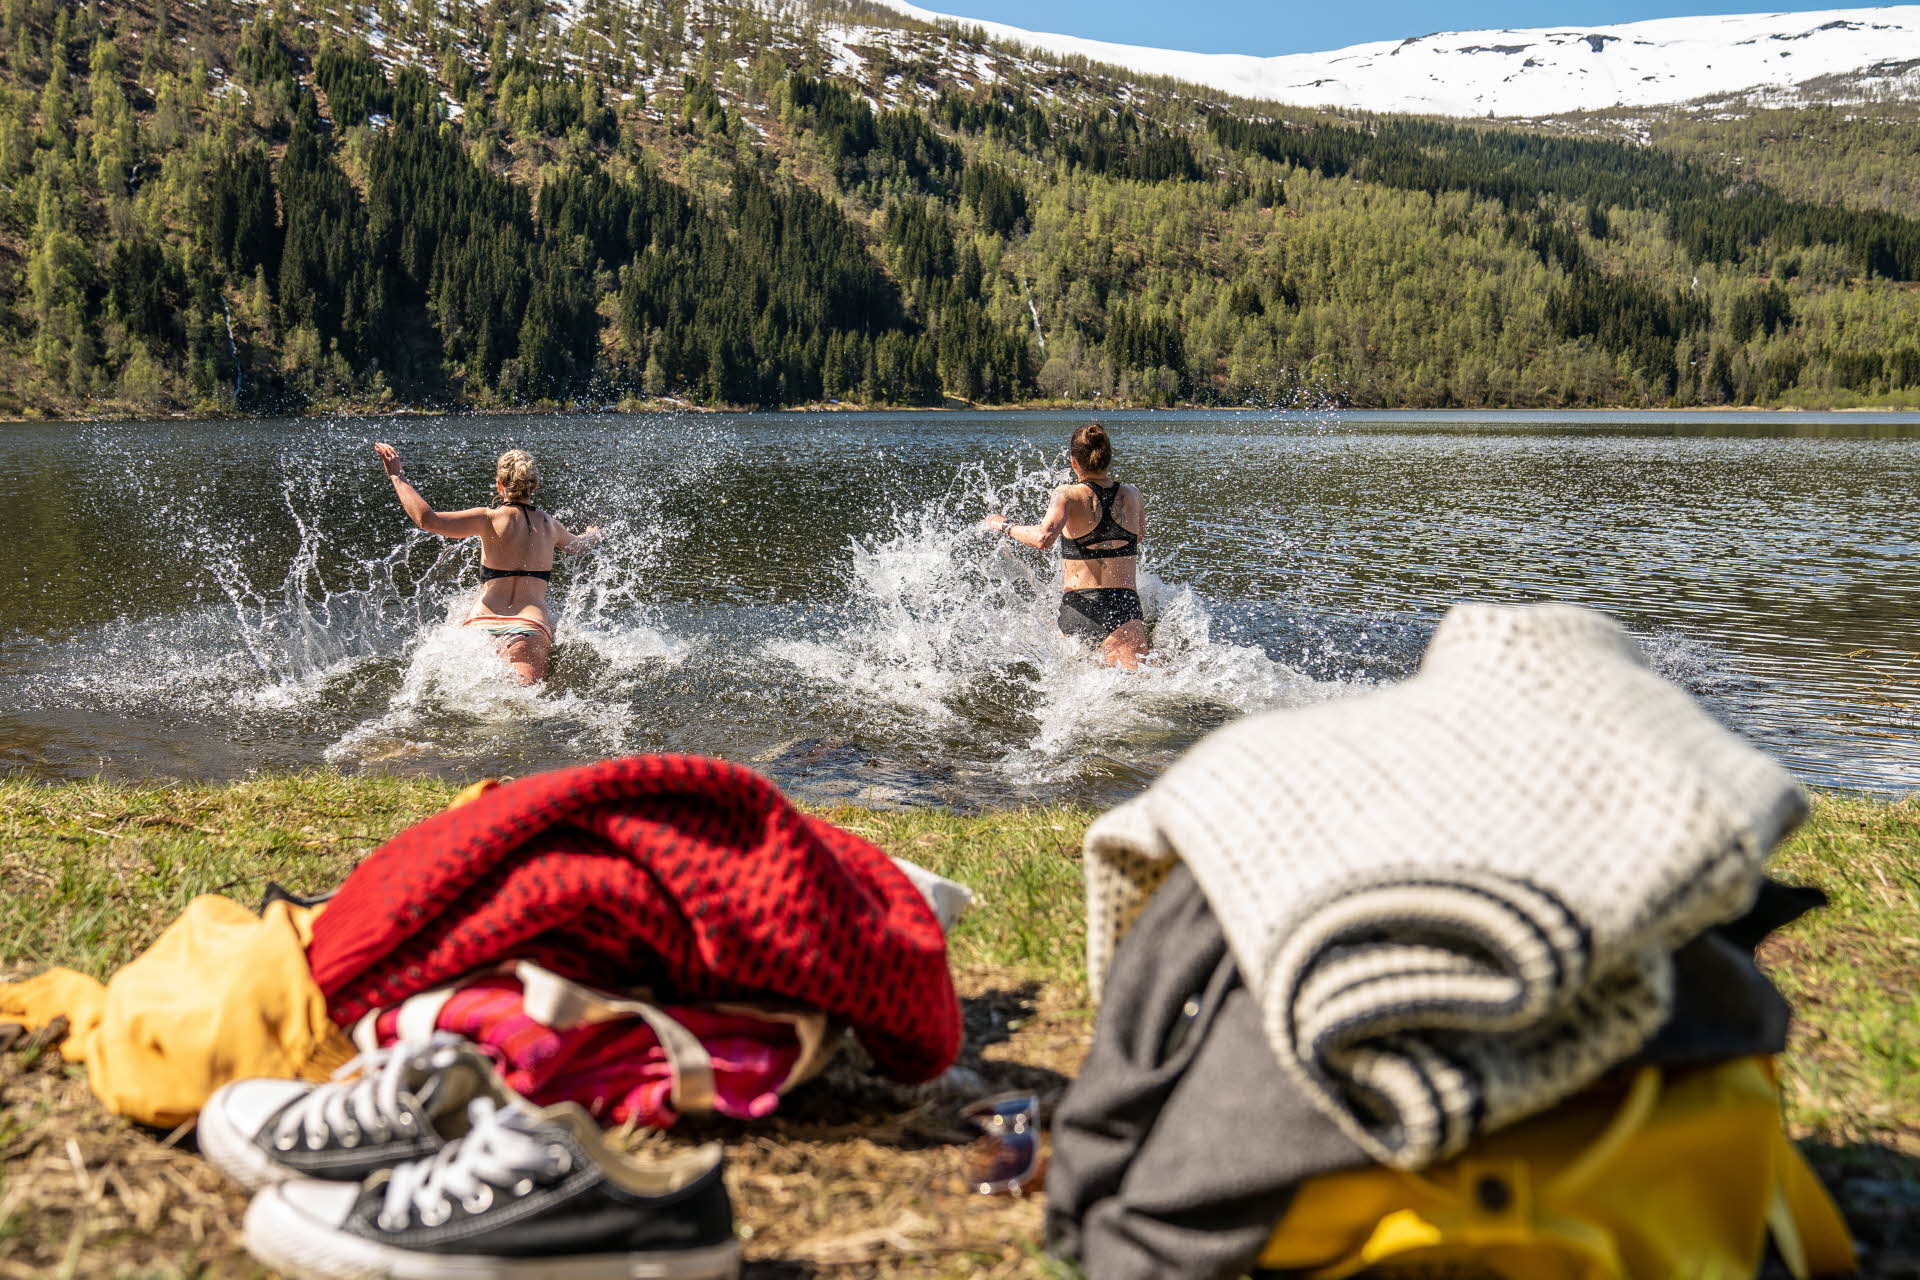 With their clothing and shoes on the ground in front, two women run into a lake with snow-capped mountains in the background. 